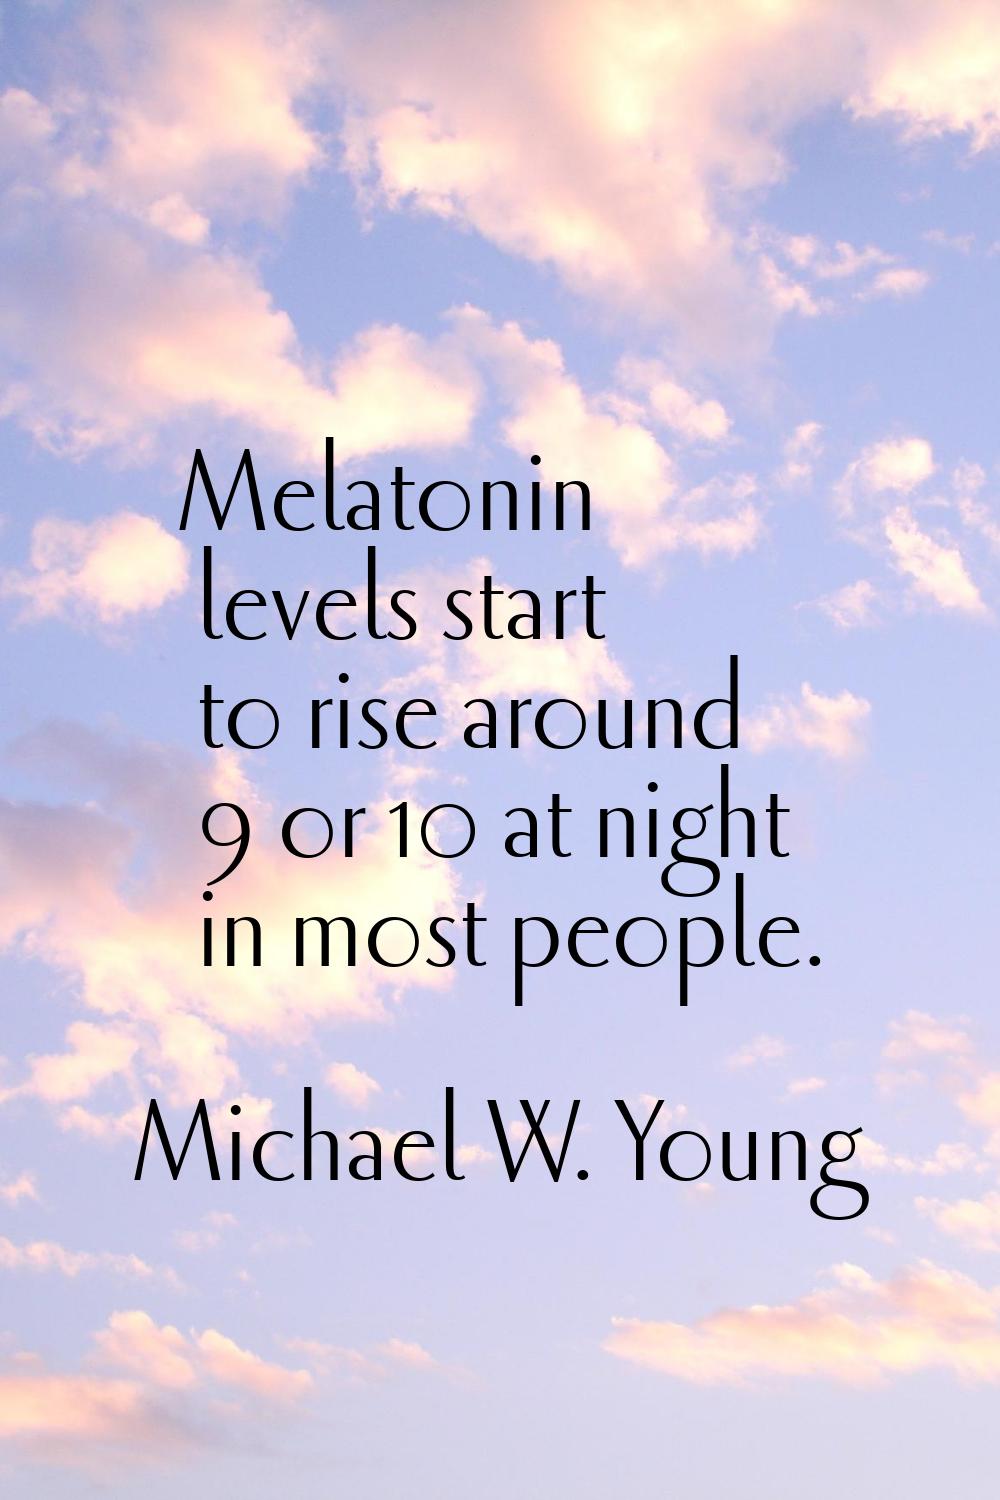 Melatonin levels start to rise around 9 or 10 at night in most people.